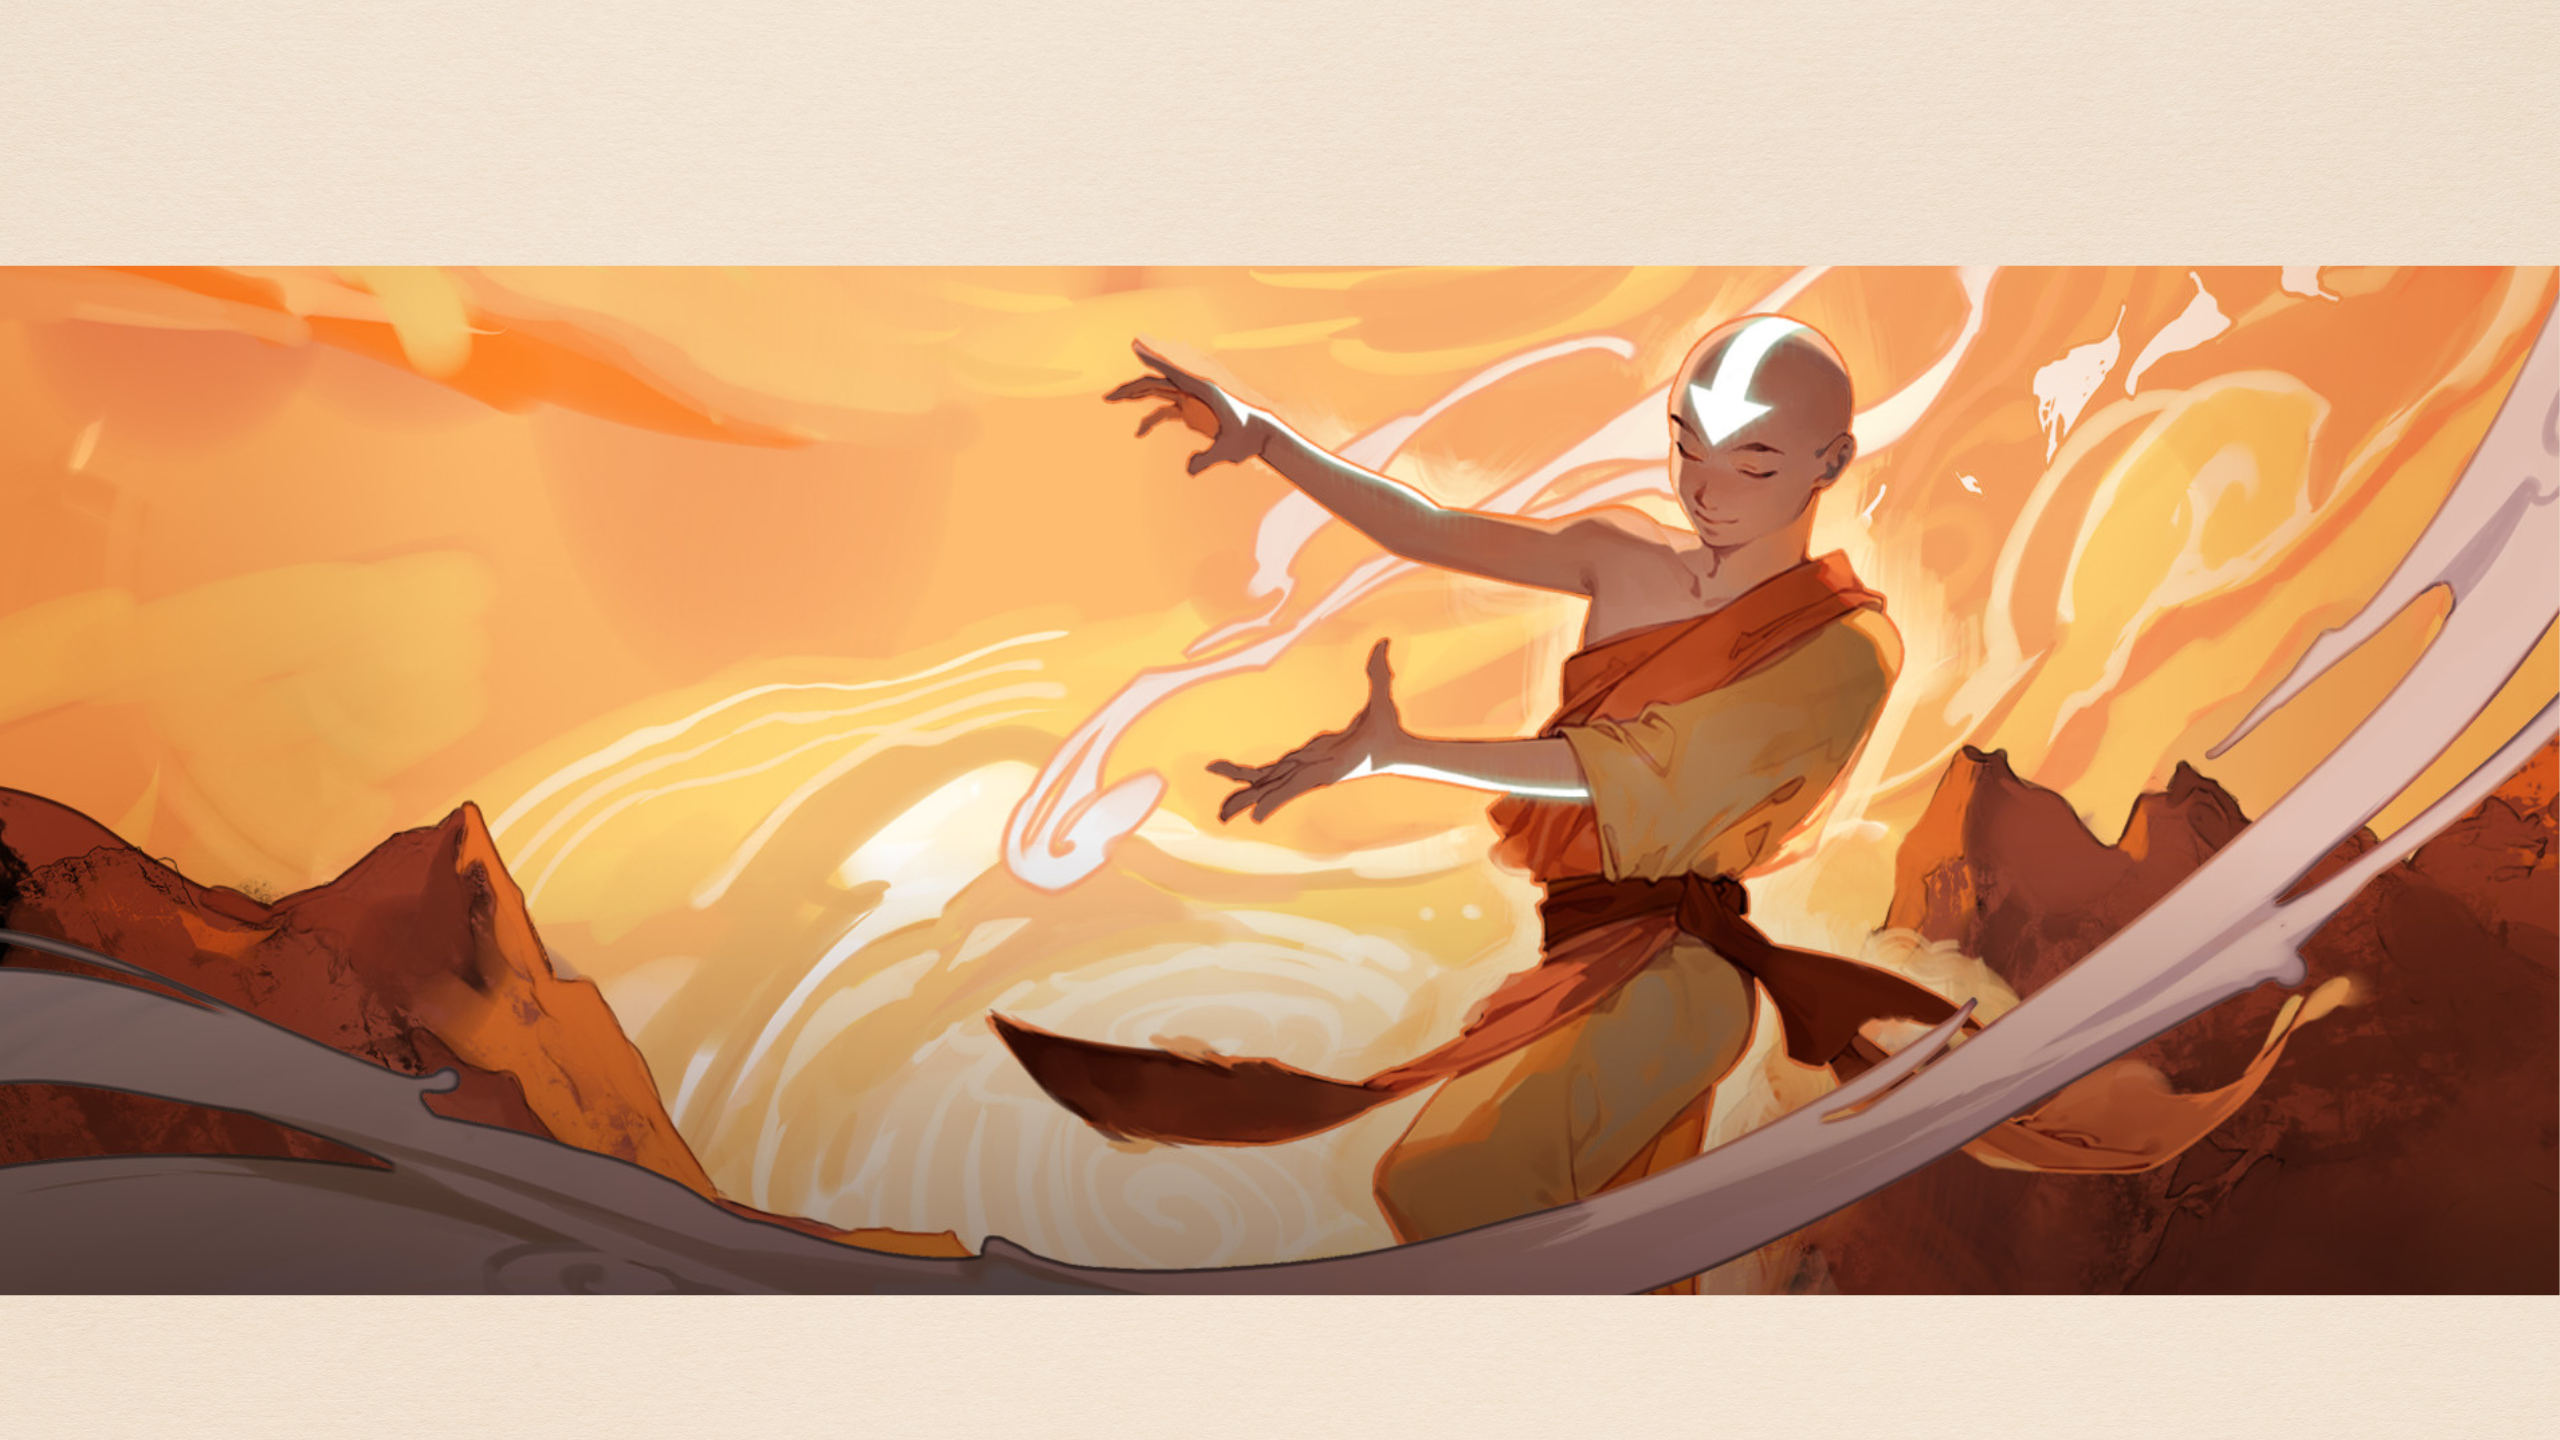 Avatar the Last Airbender Banner Image 2560 x 1440